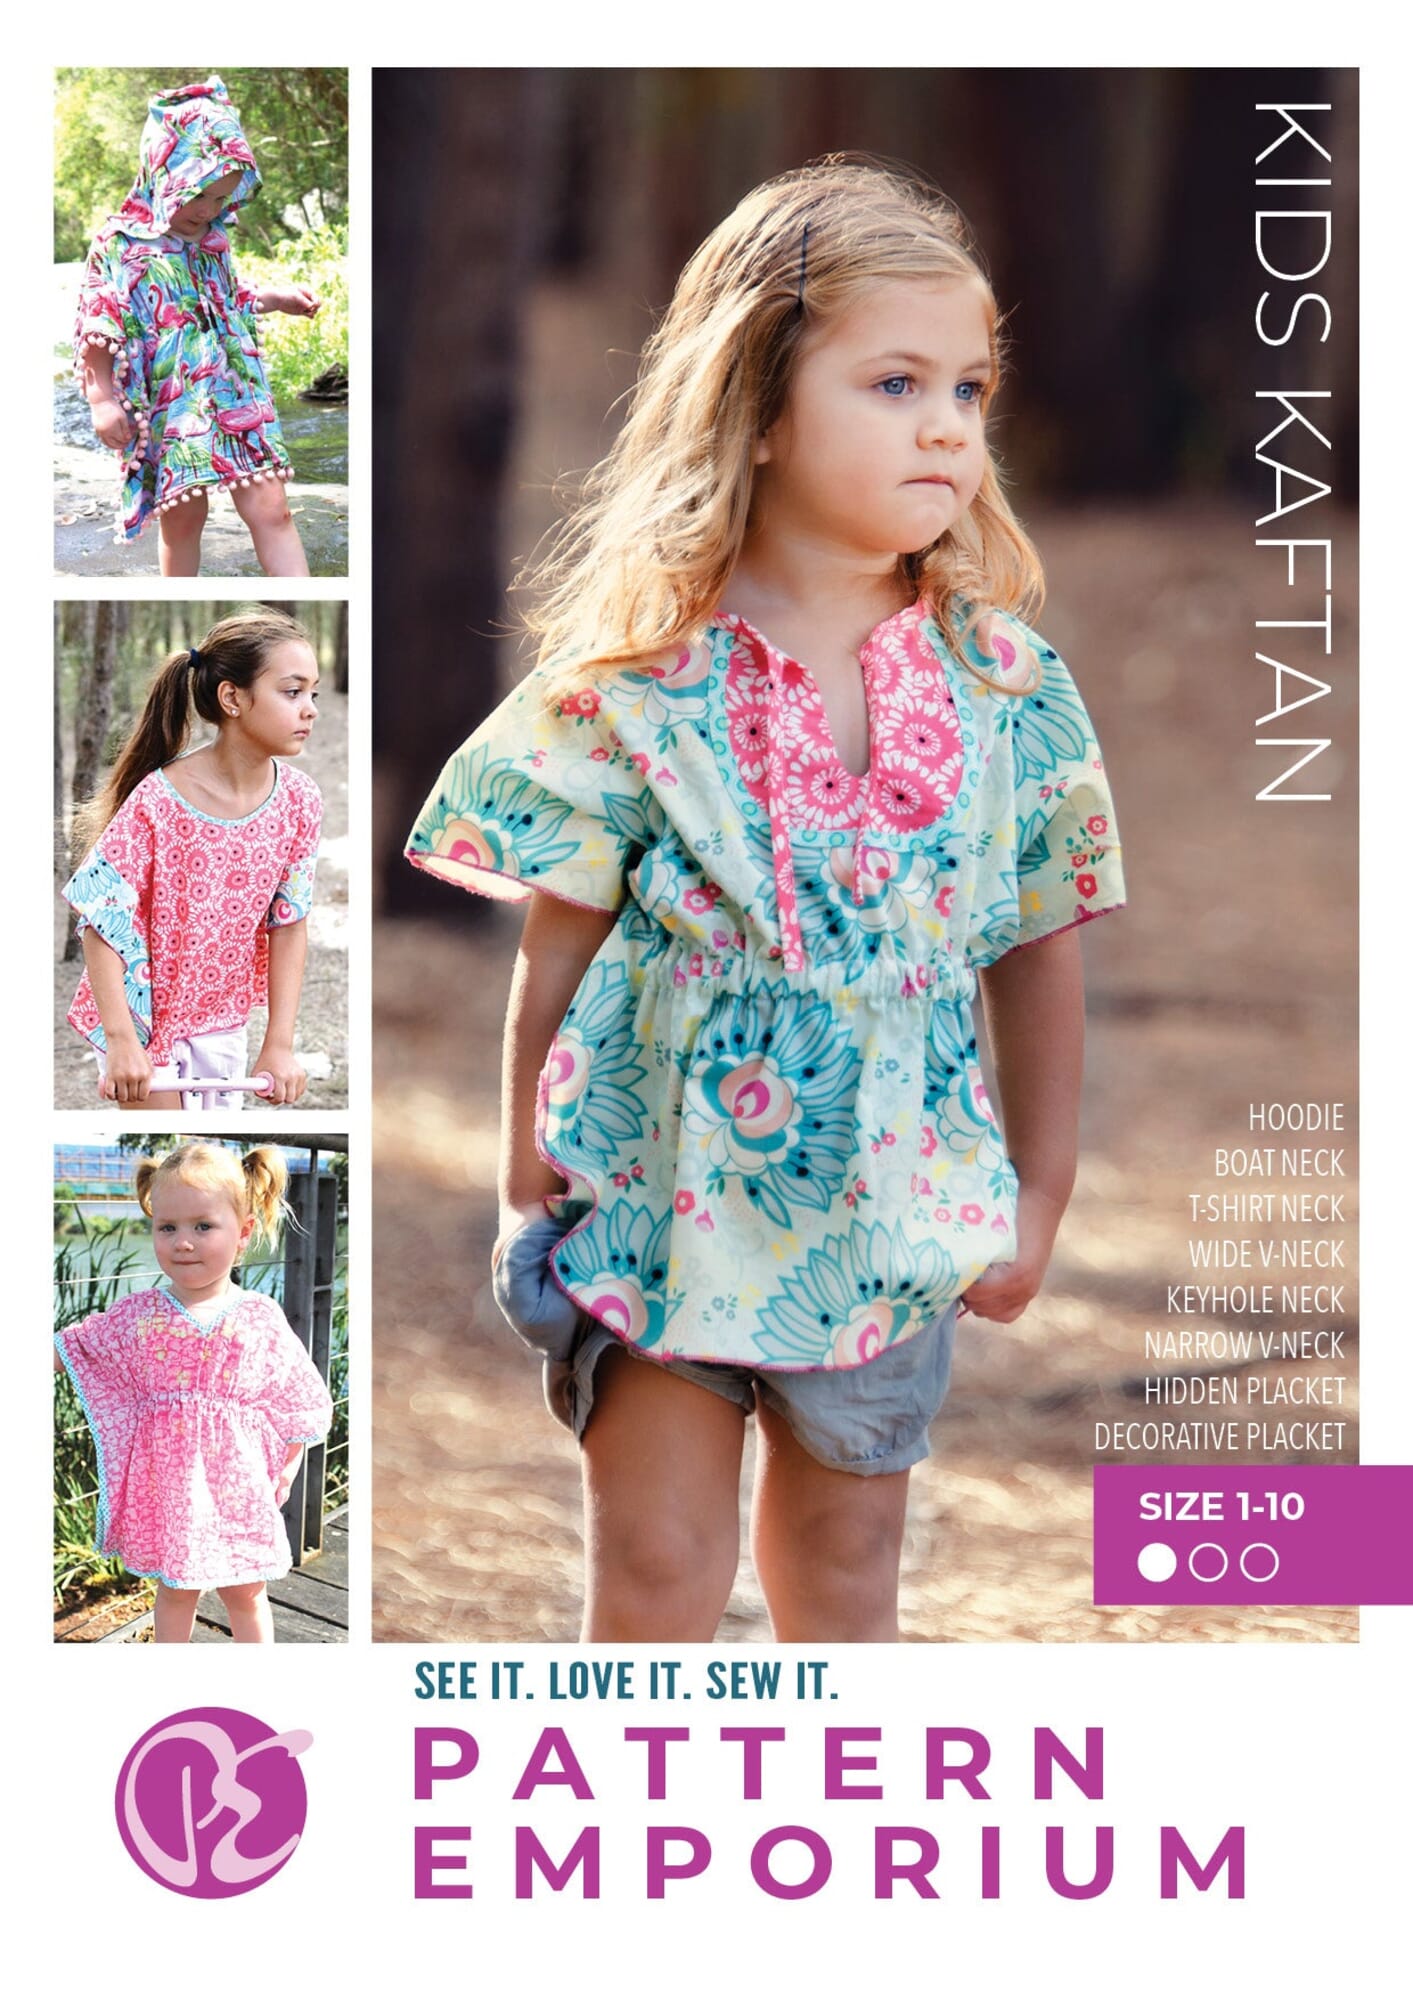 https://nusholmo.sirv.com/item/images/1022331222/full/Kids-Kaftan-Sewing-Pattern-Emporium-COVER-1-2000x.jpg?scale.width=2000&scale.height=2000